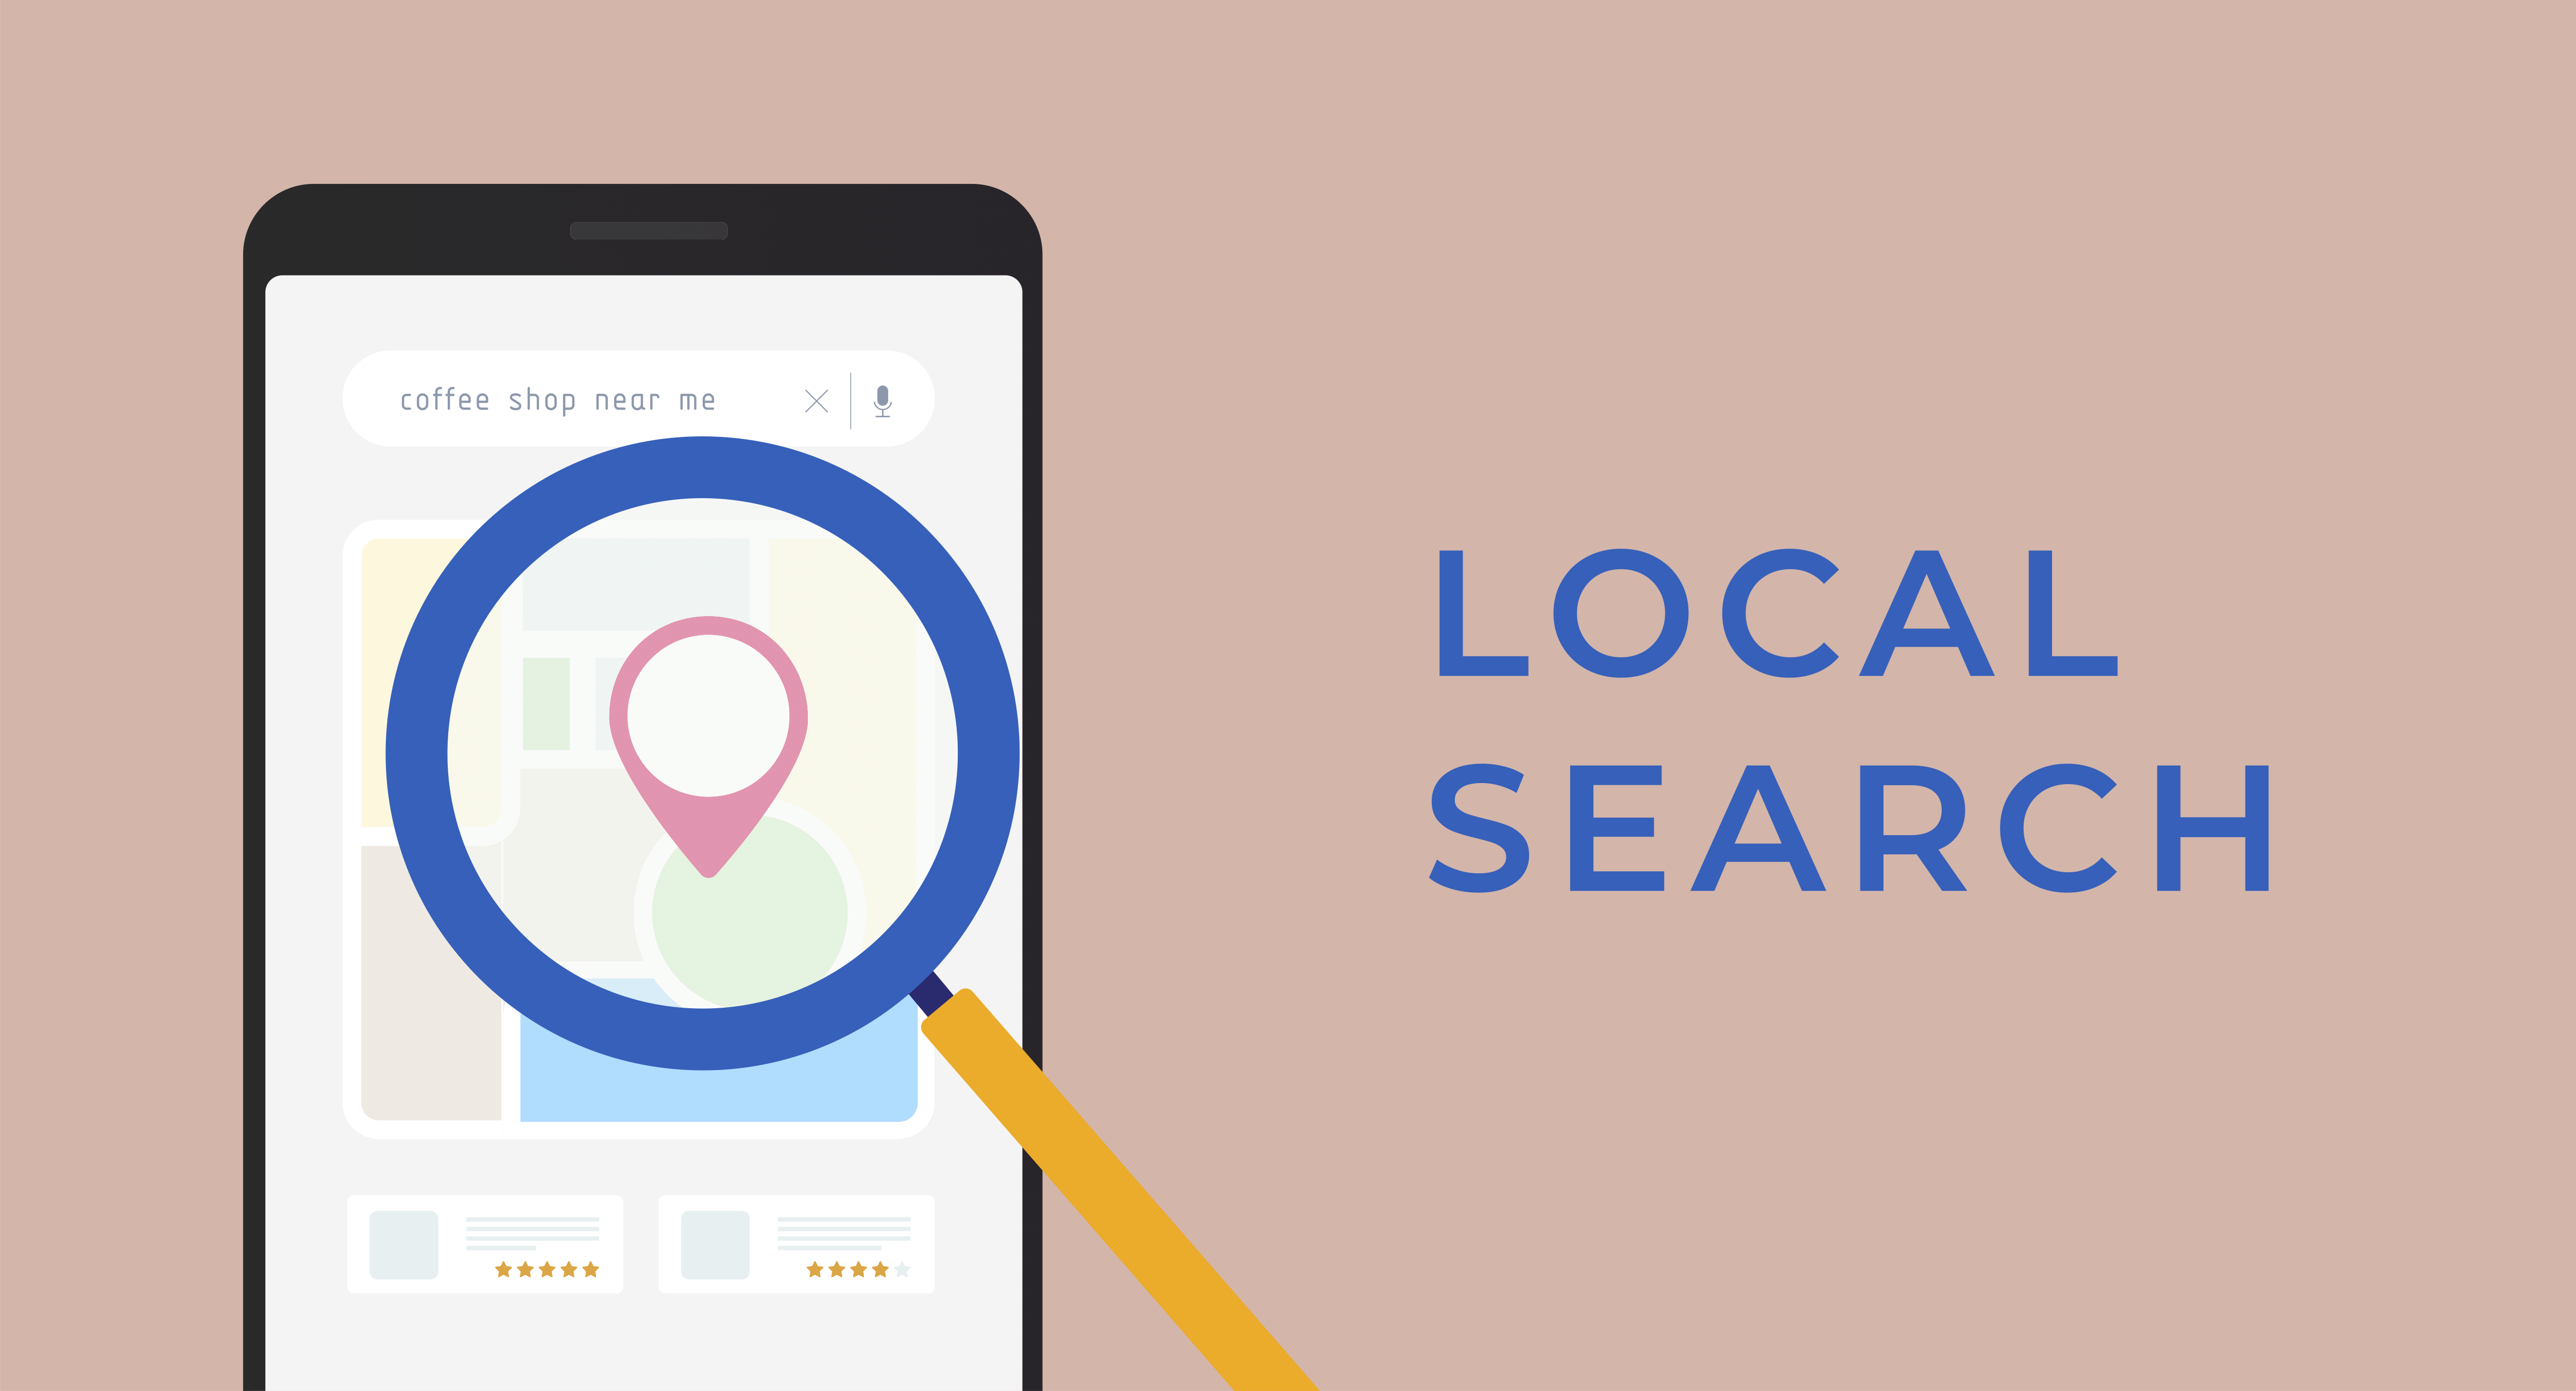 Local Search text next to an image of a phone and location pin